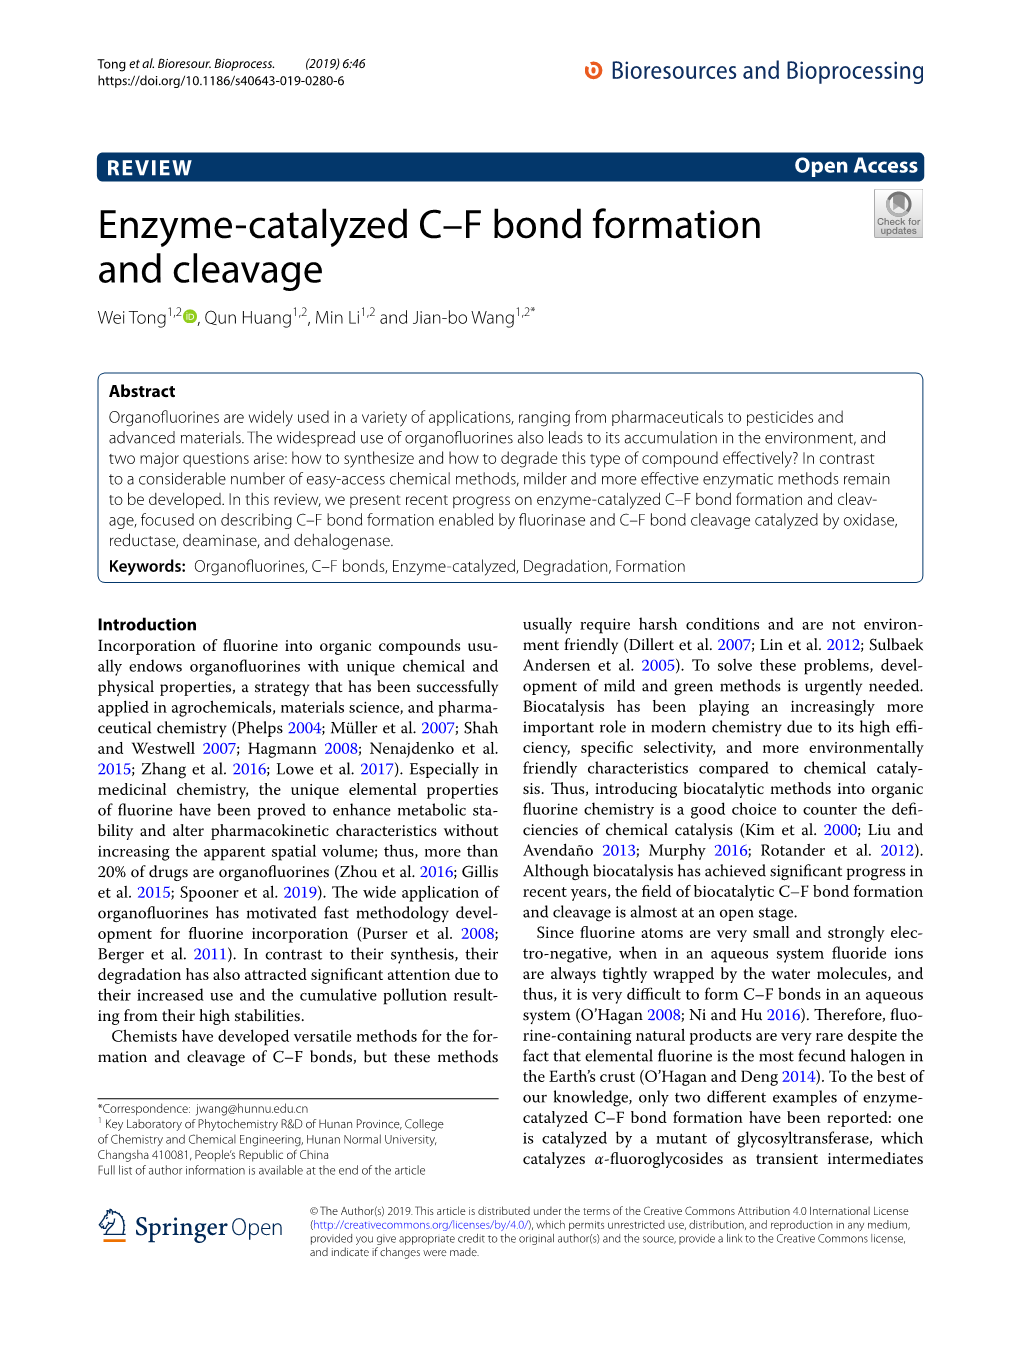 Enzyme-Catalyzed C–F Bond Formation and Cleavage